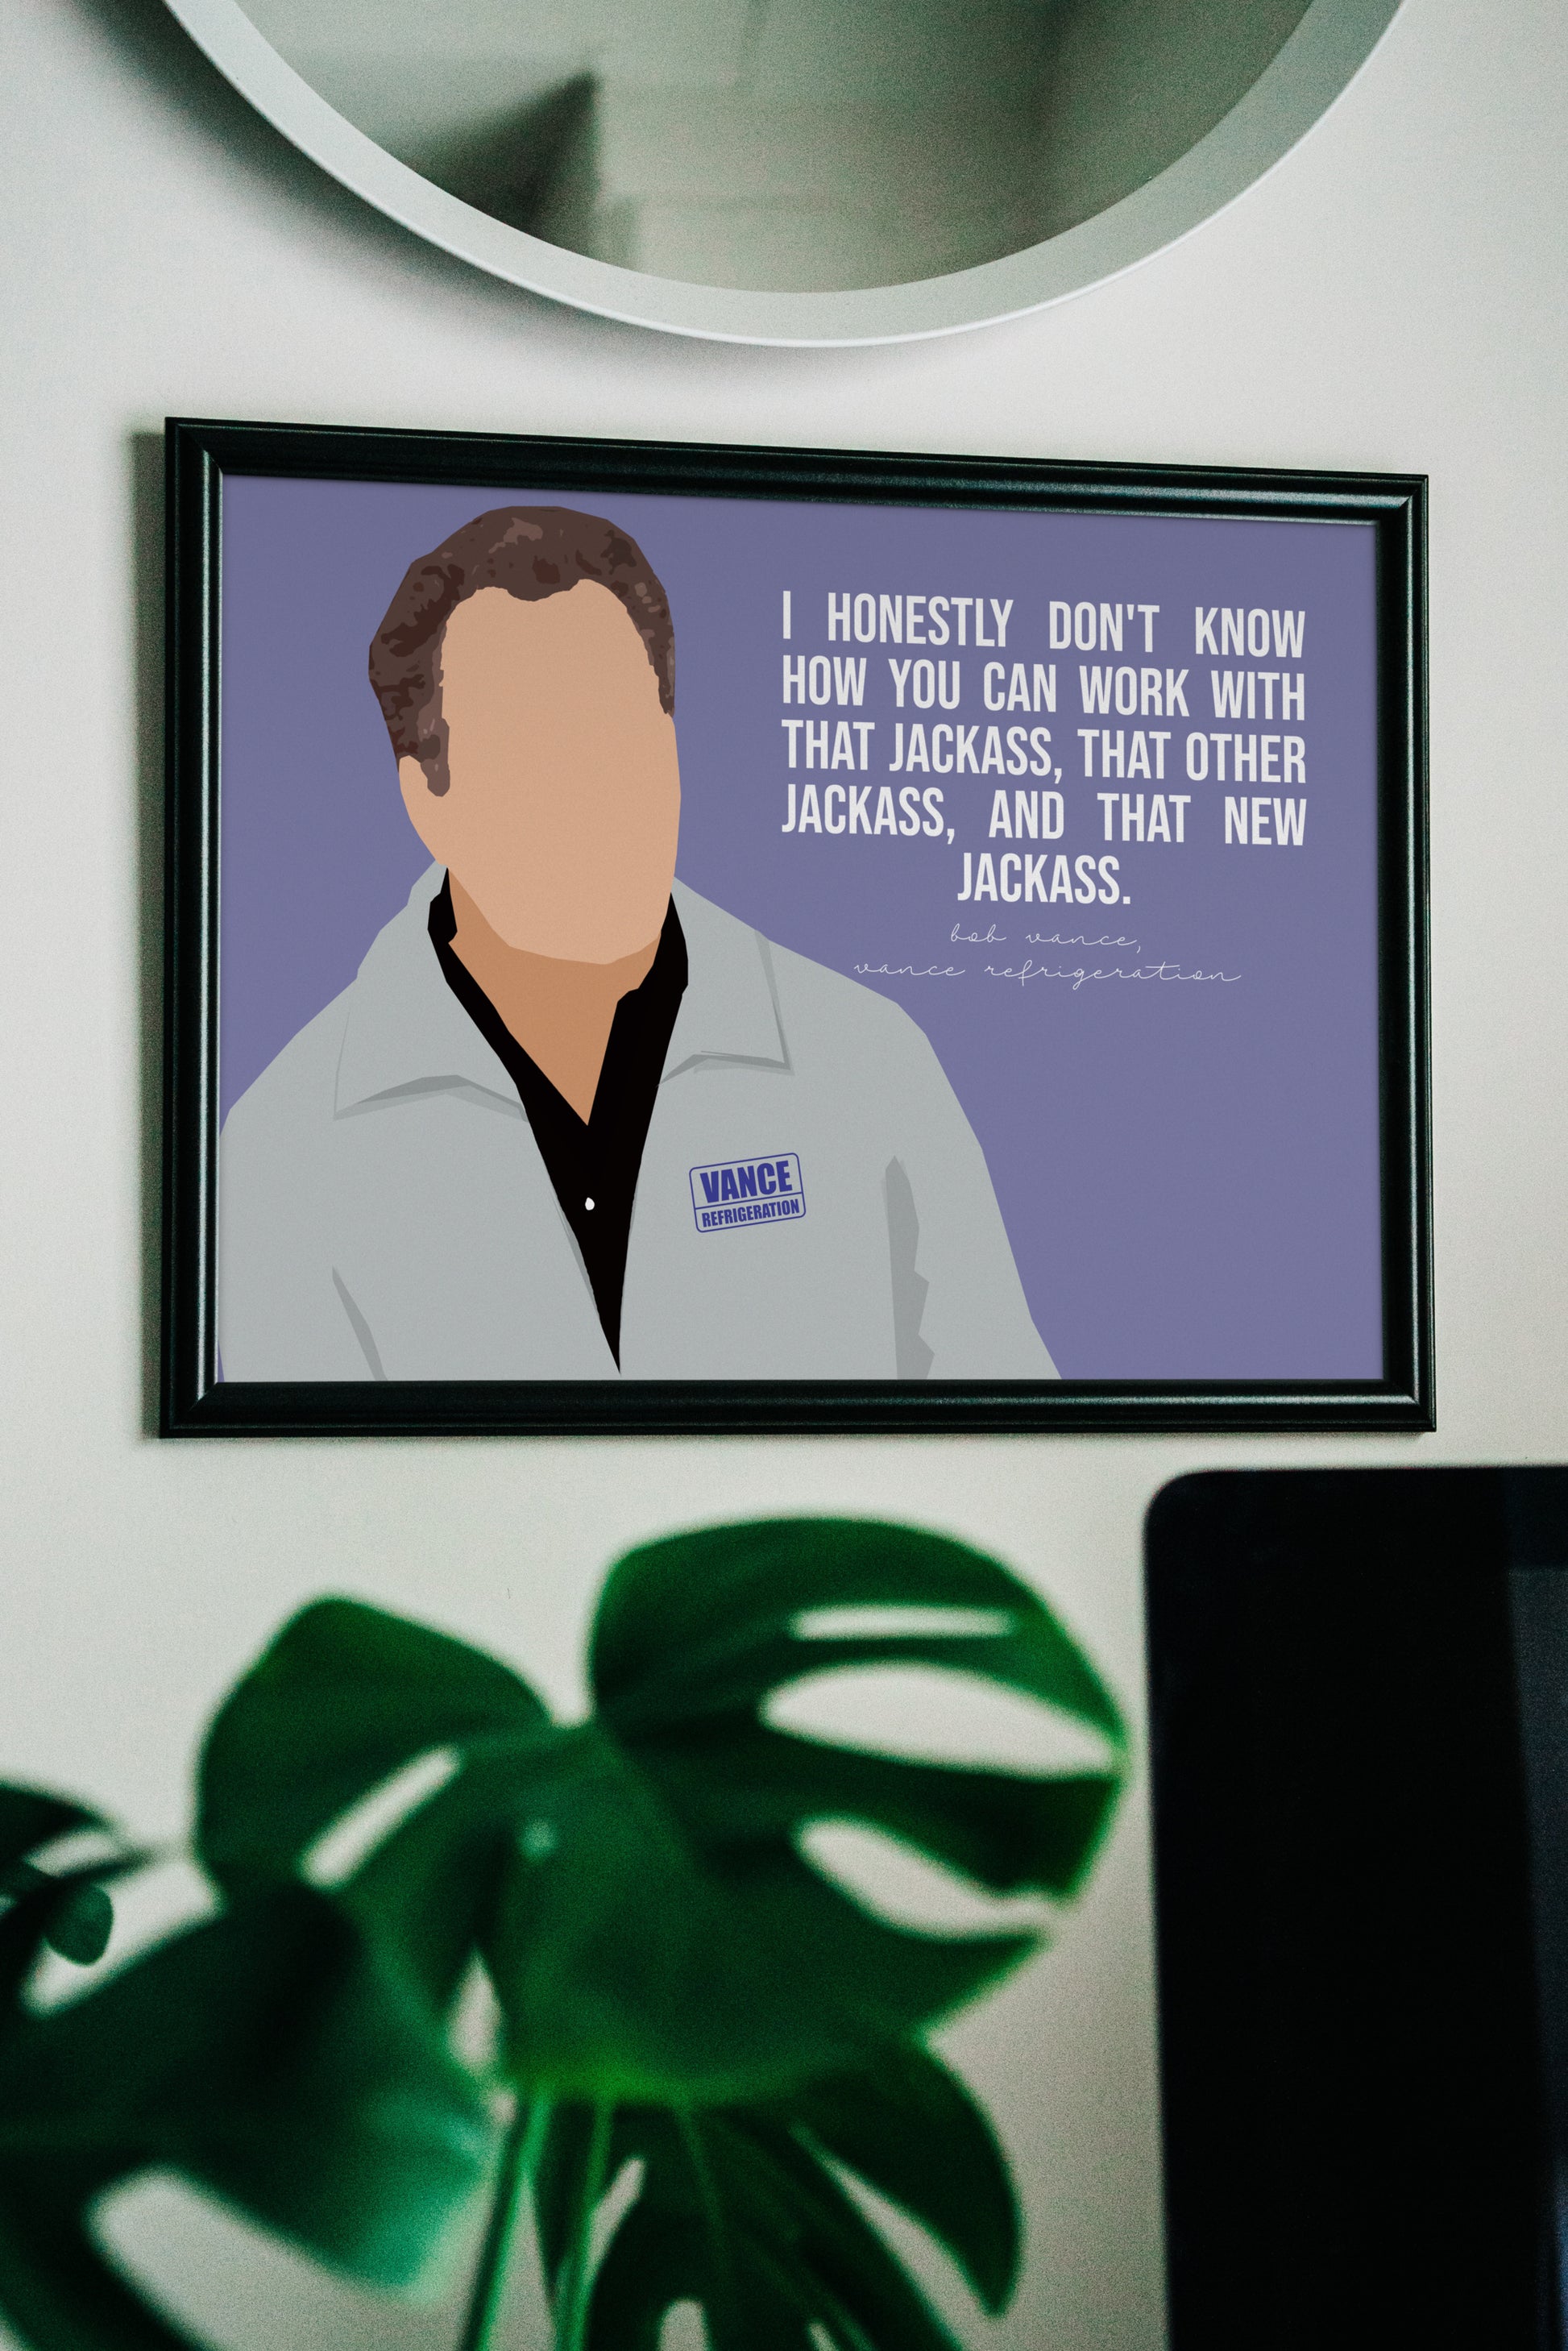 Bob Vance - The Office tv show funny quote poster